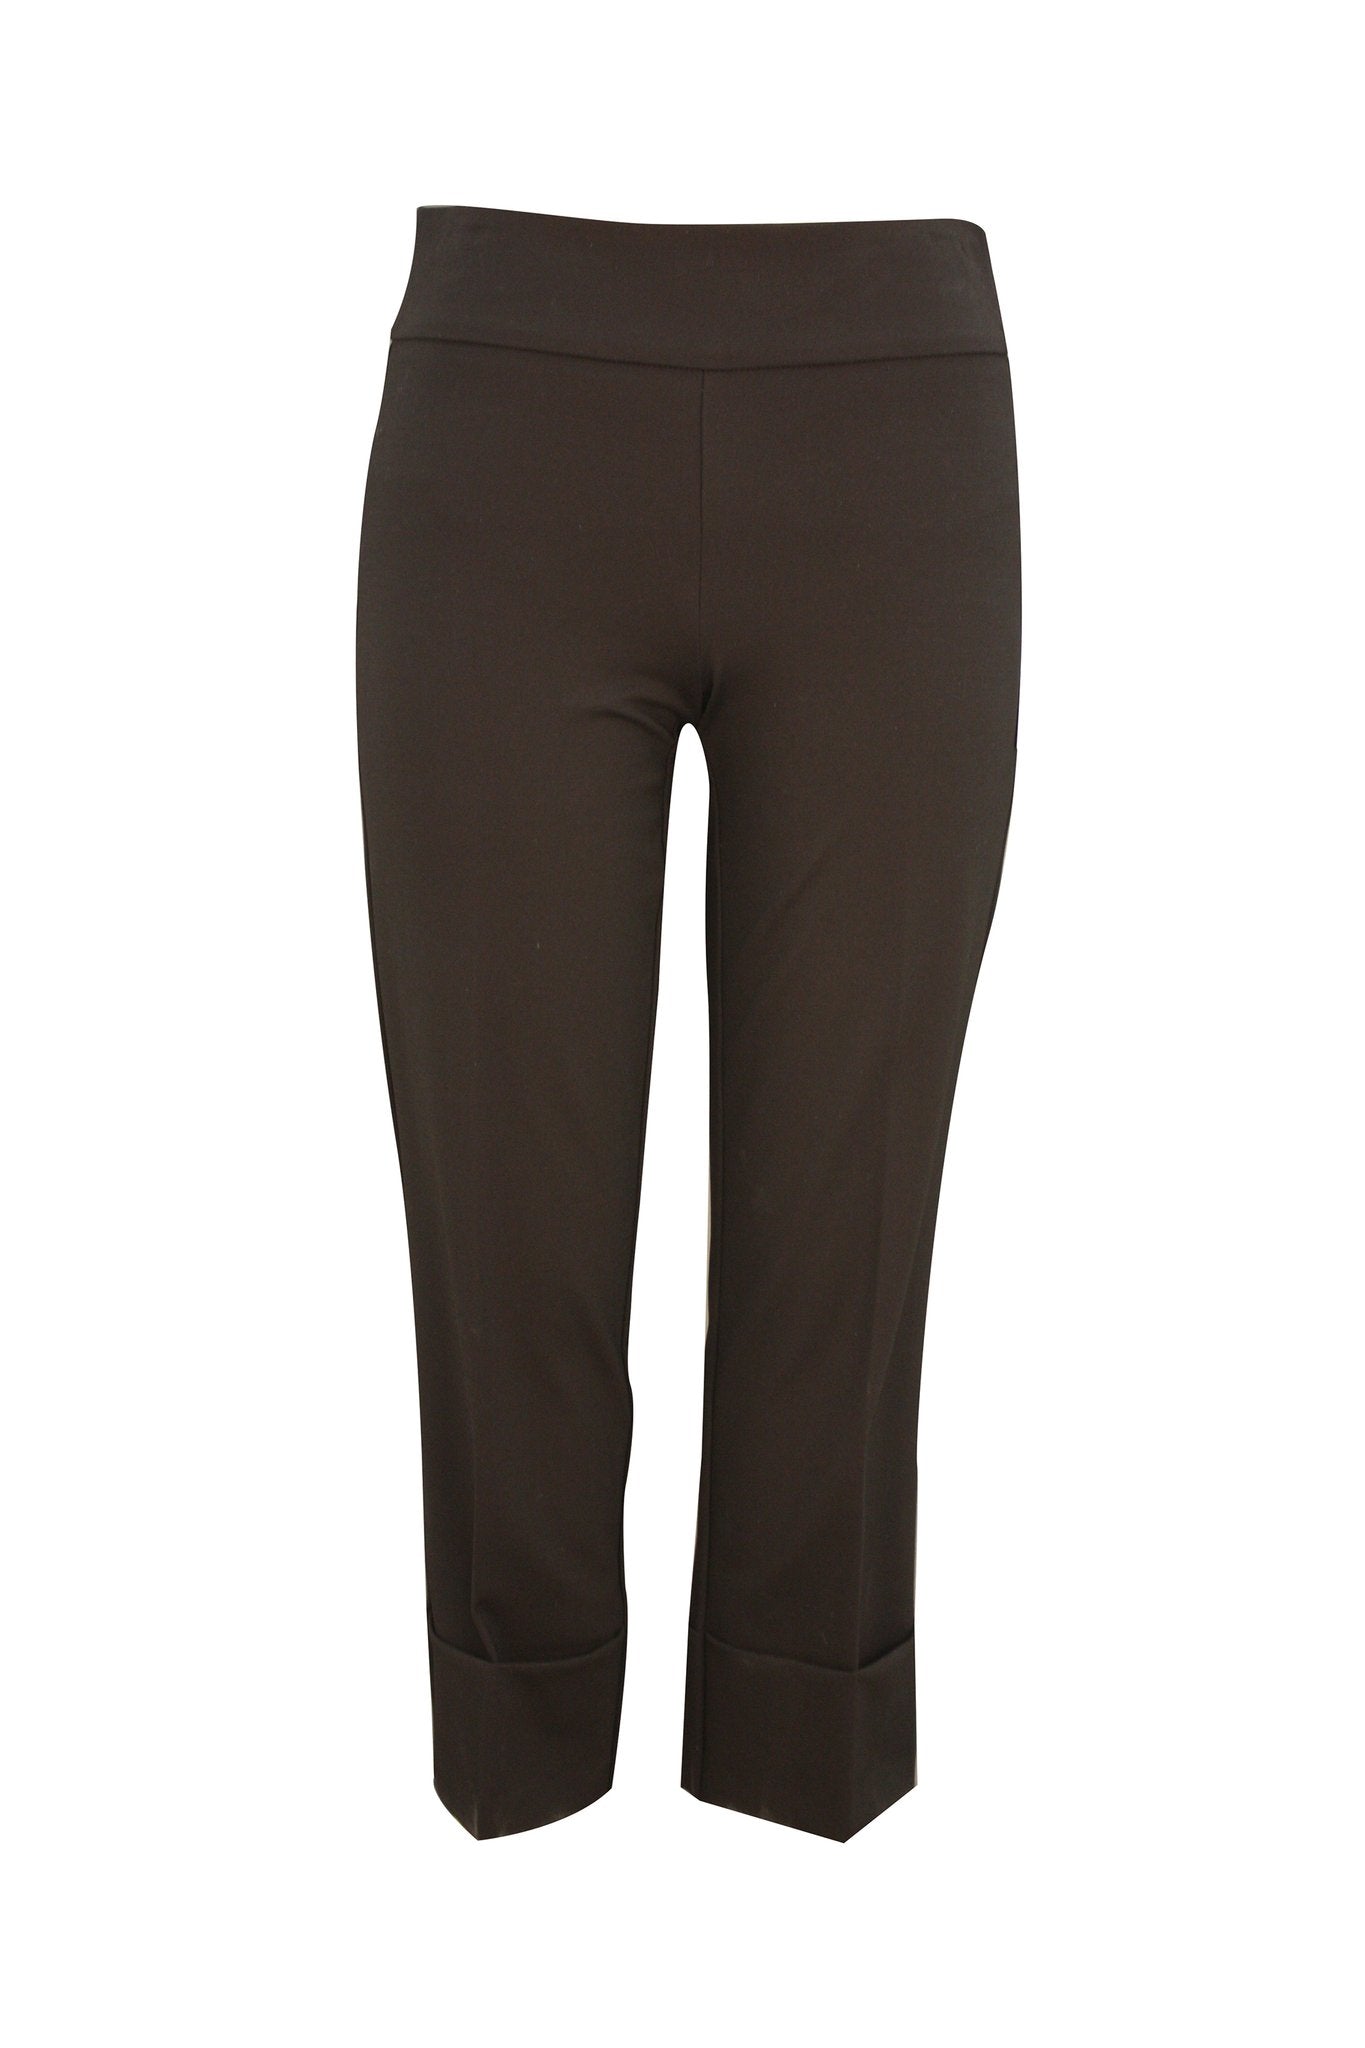 LADIES LOWER / TRACK PANTS FOR WOMEN Trousers & Pants